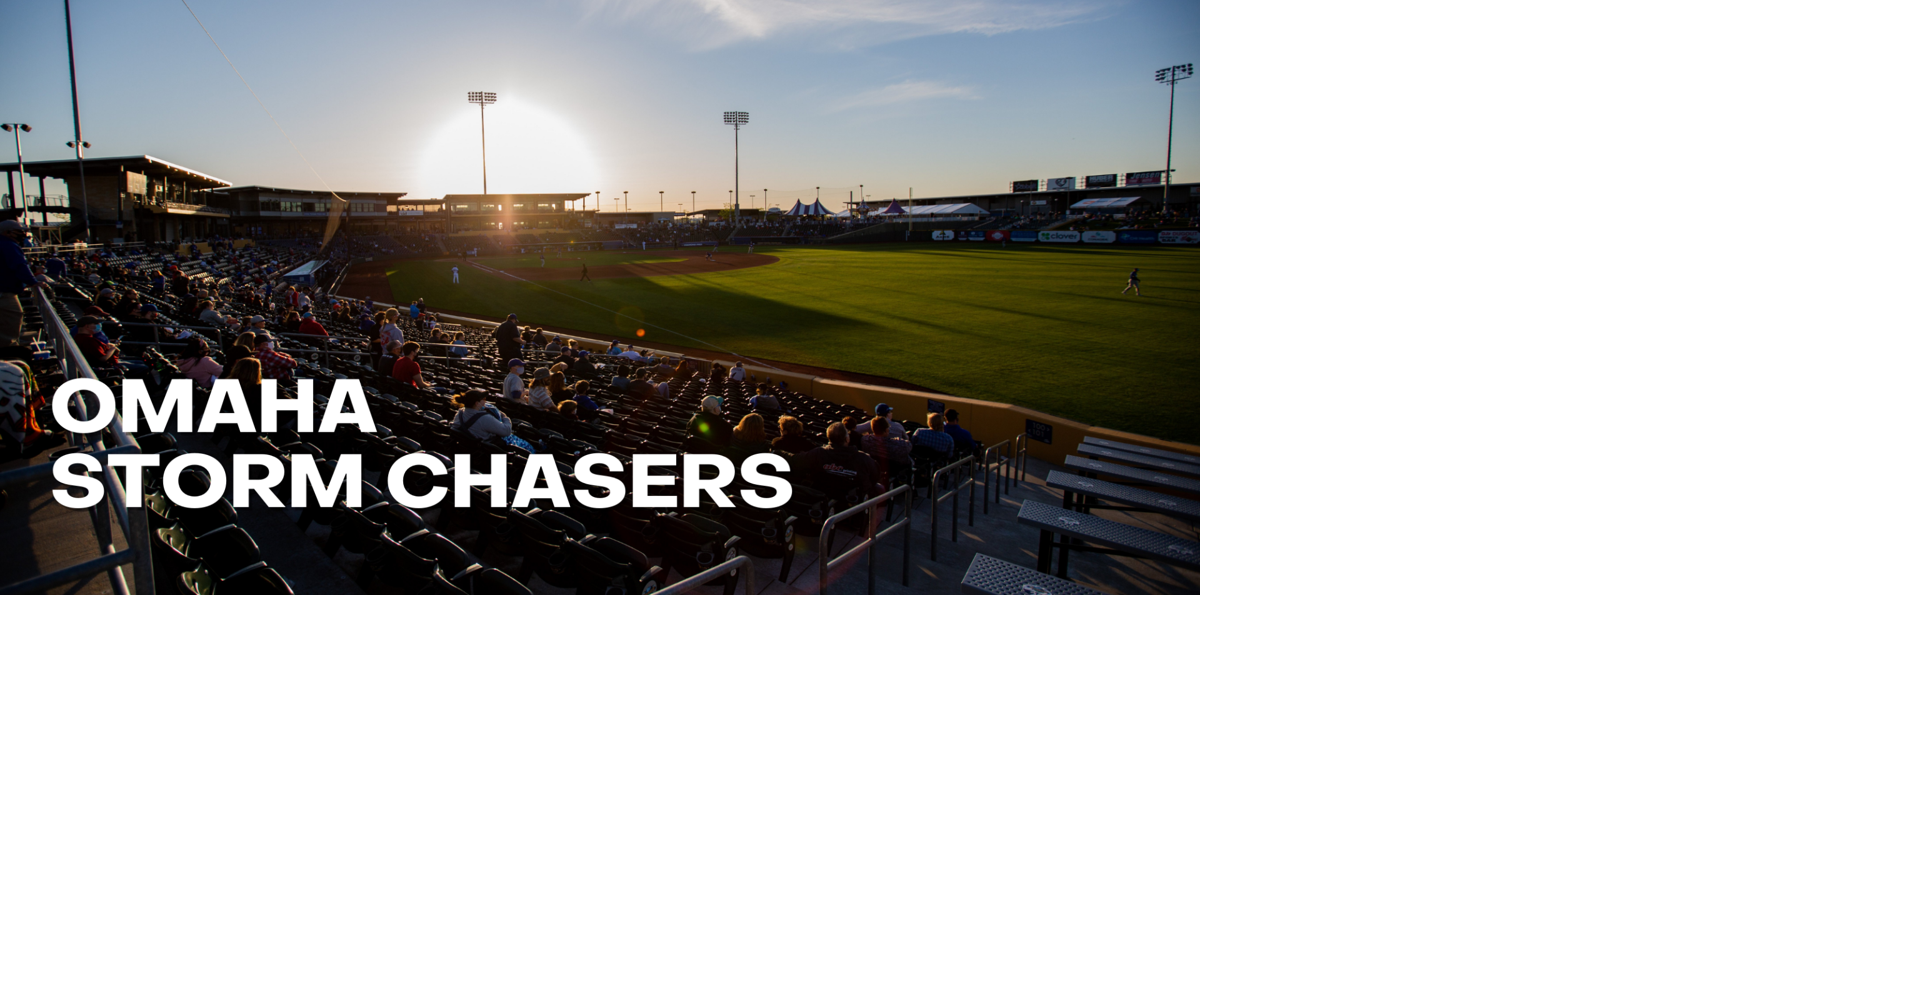 Omaha Storm Chasers (@omahastormchasers) • Instagram photos and videos